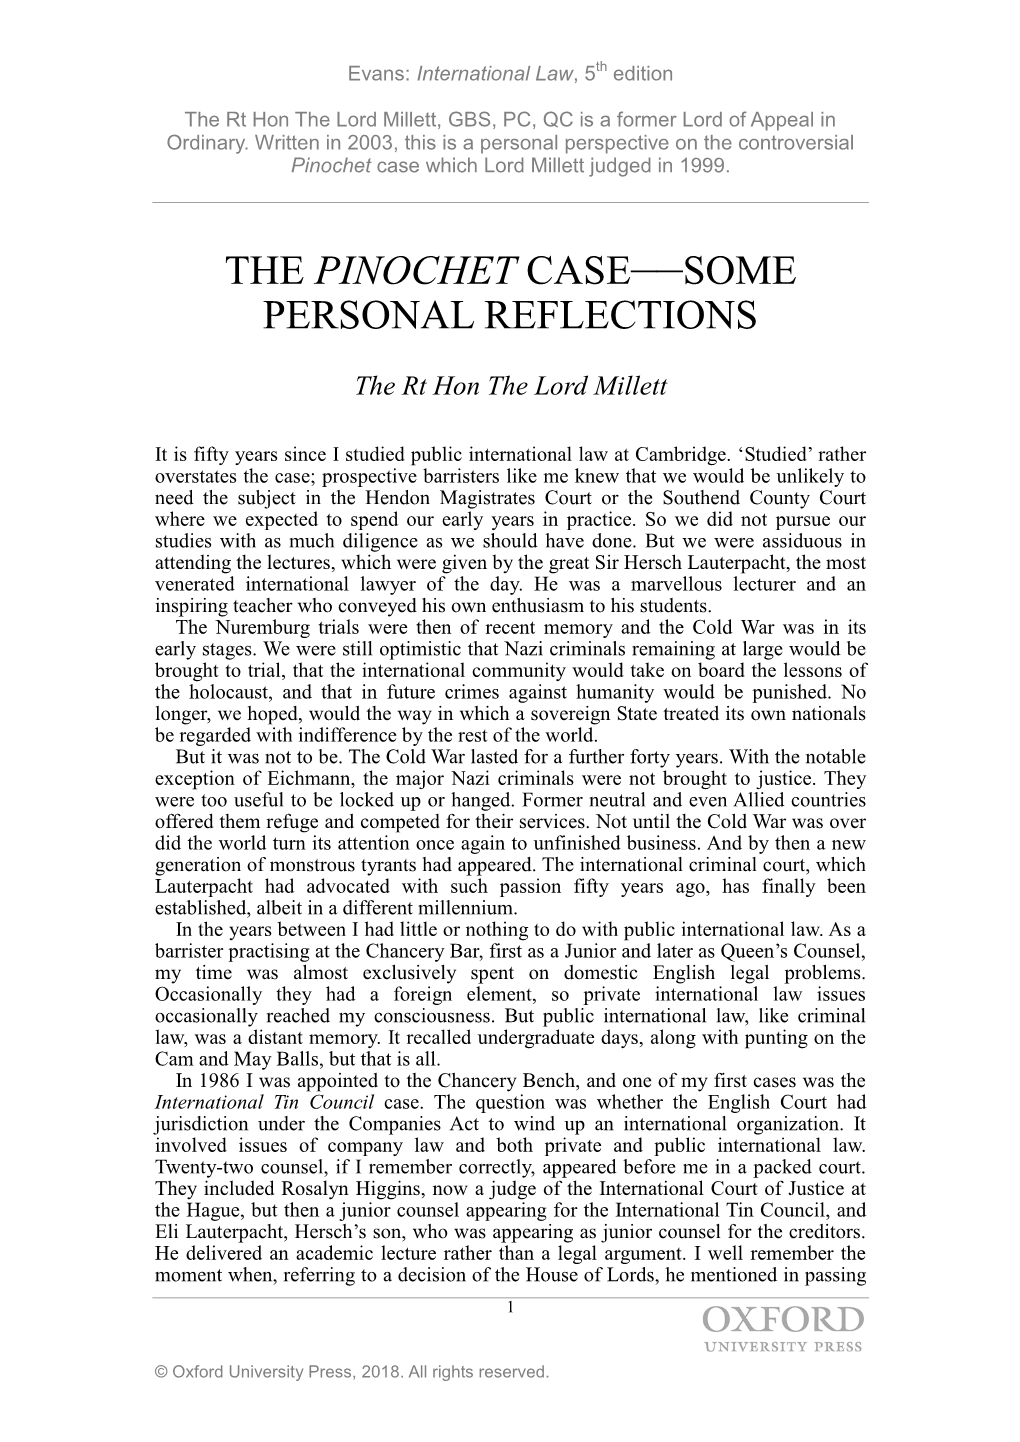 The Pinochet Case––Some Personal Reflections